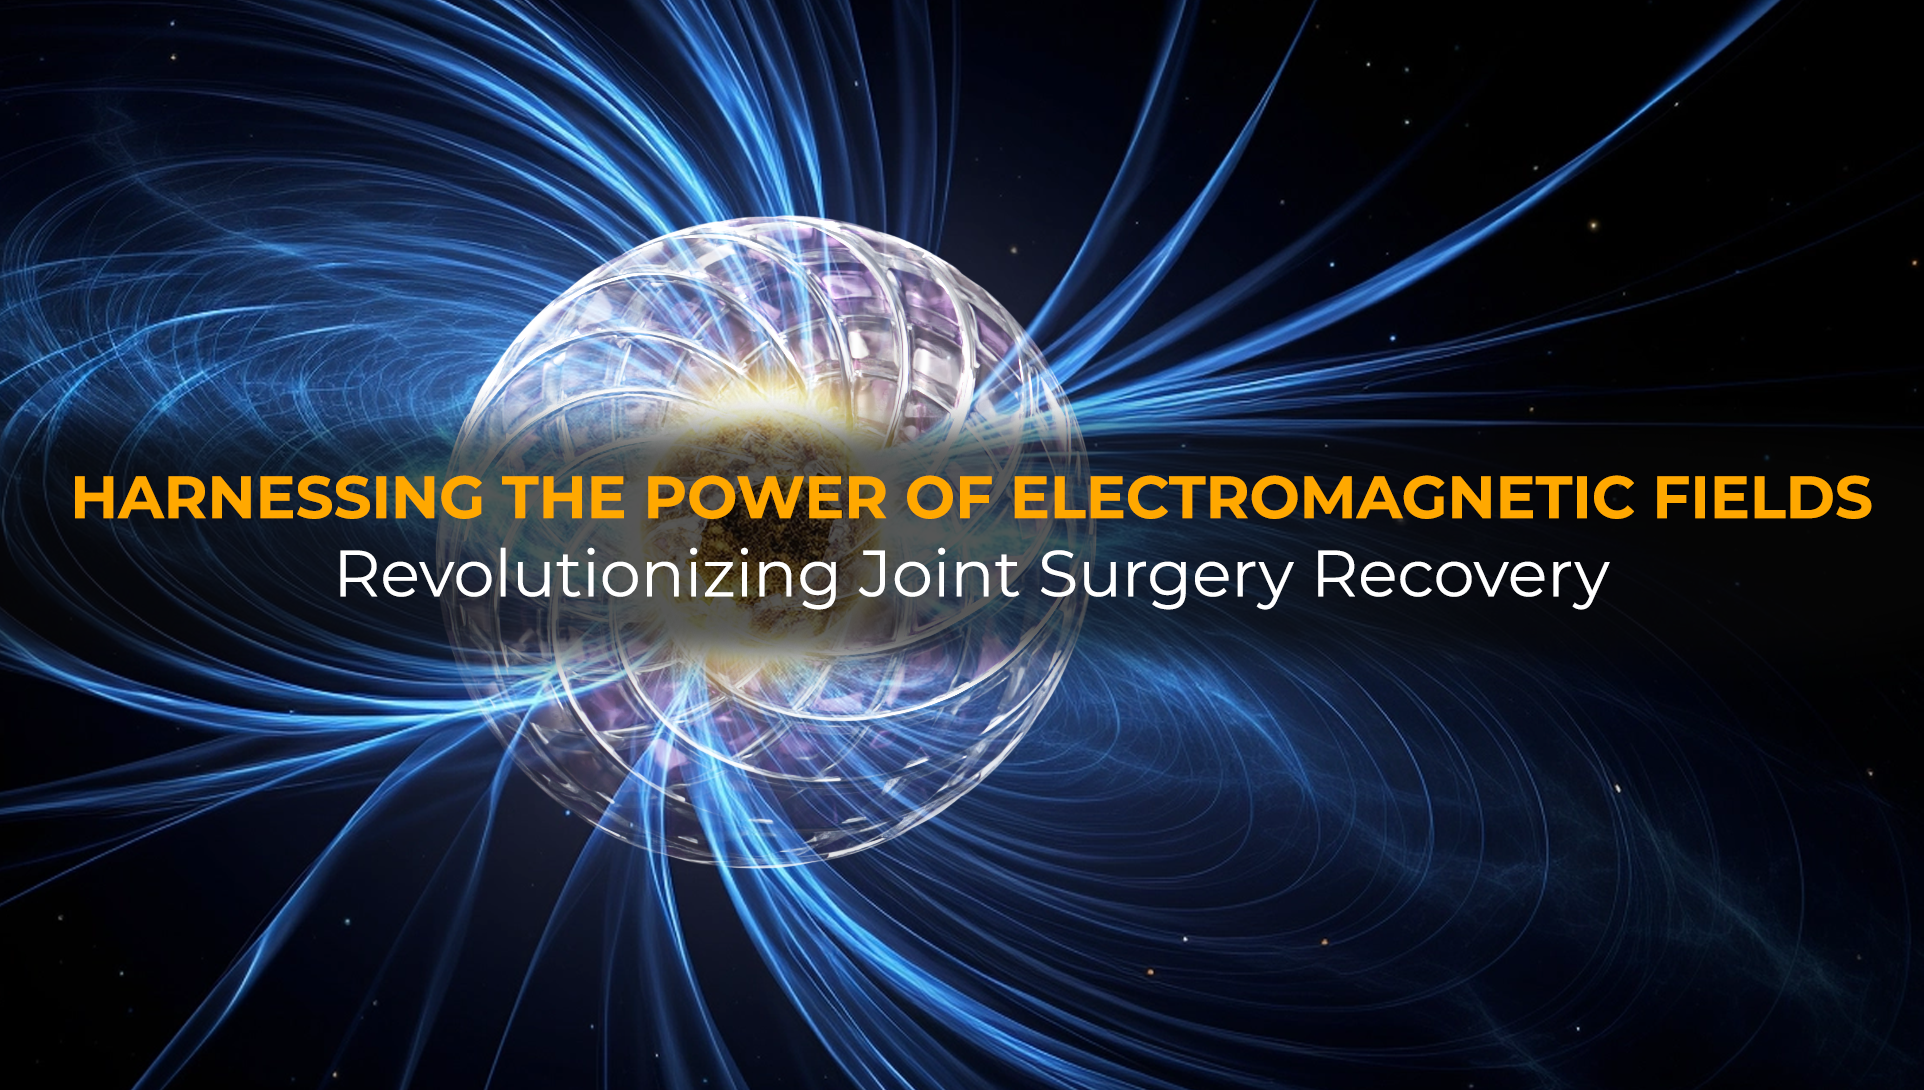 Harnessing the Power of Electromagnetic Fields: Revolutionizing Joint Surgery Recovery